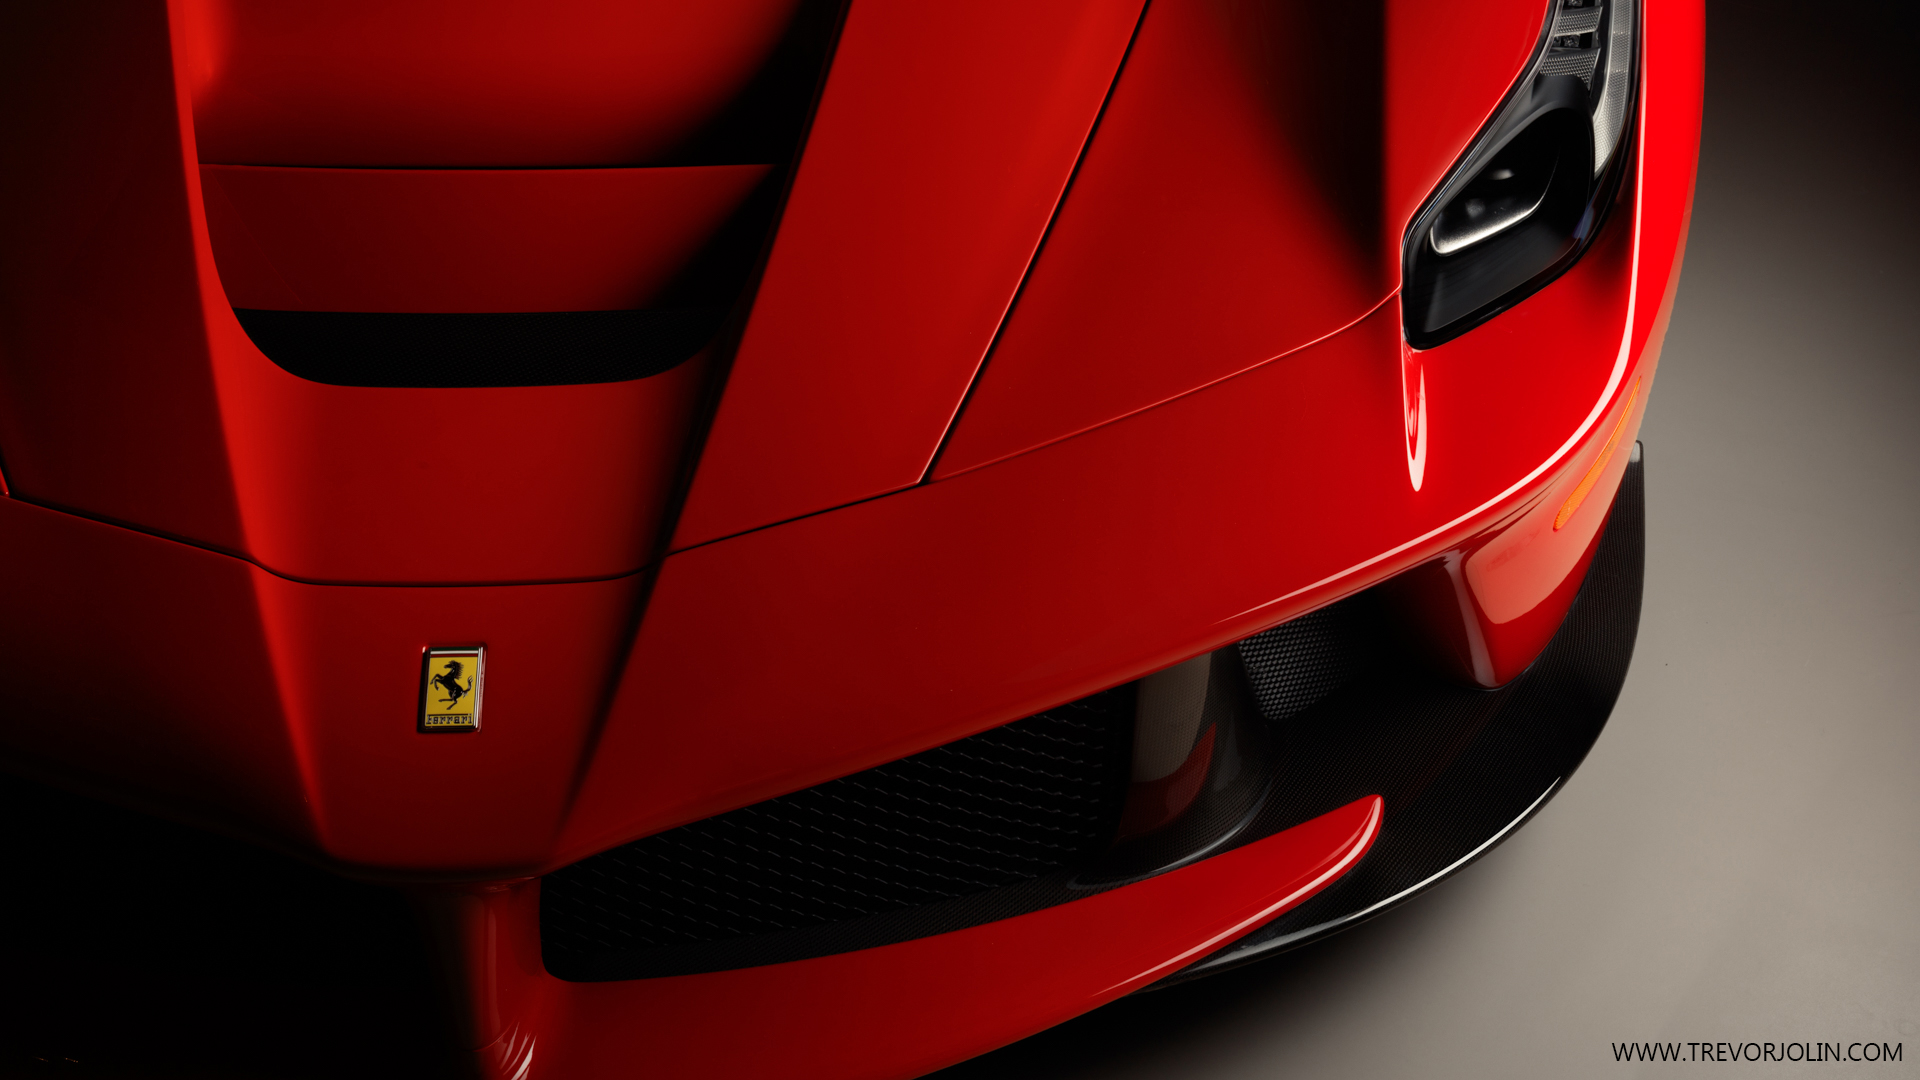 Your Ridiculously Awesome Ferrari Laferrari Wallpaper Is Here